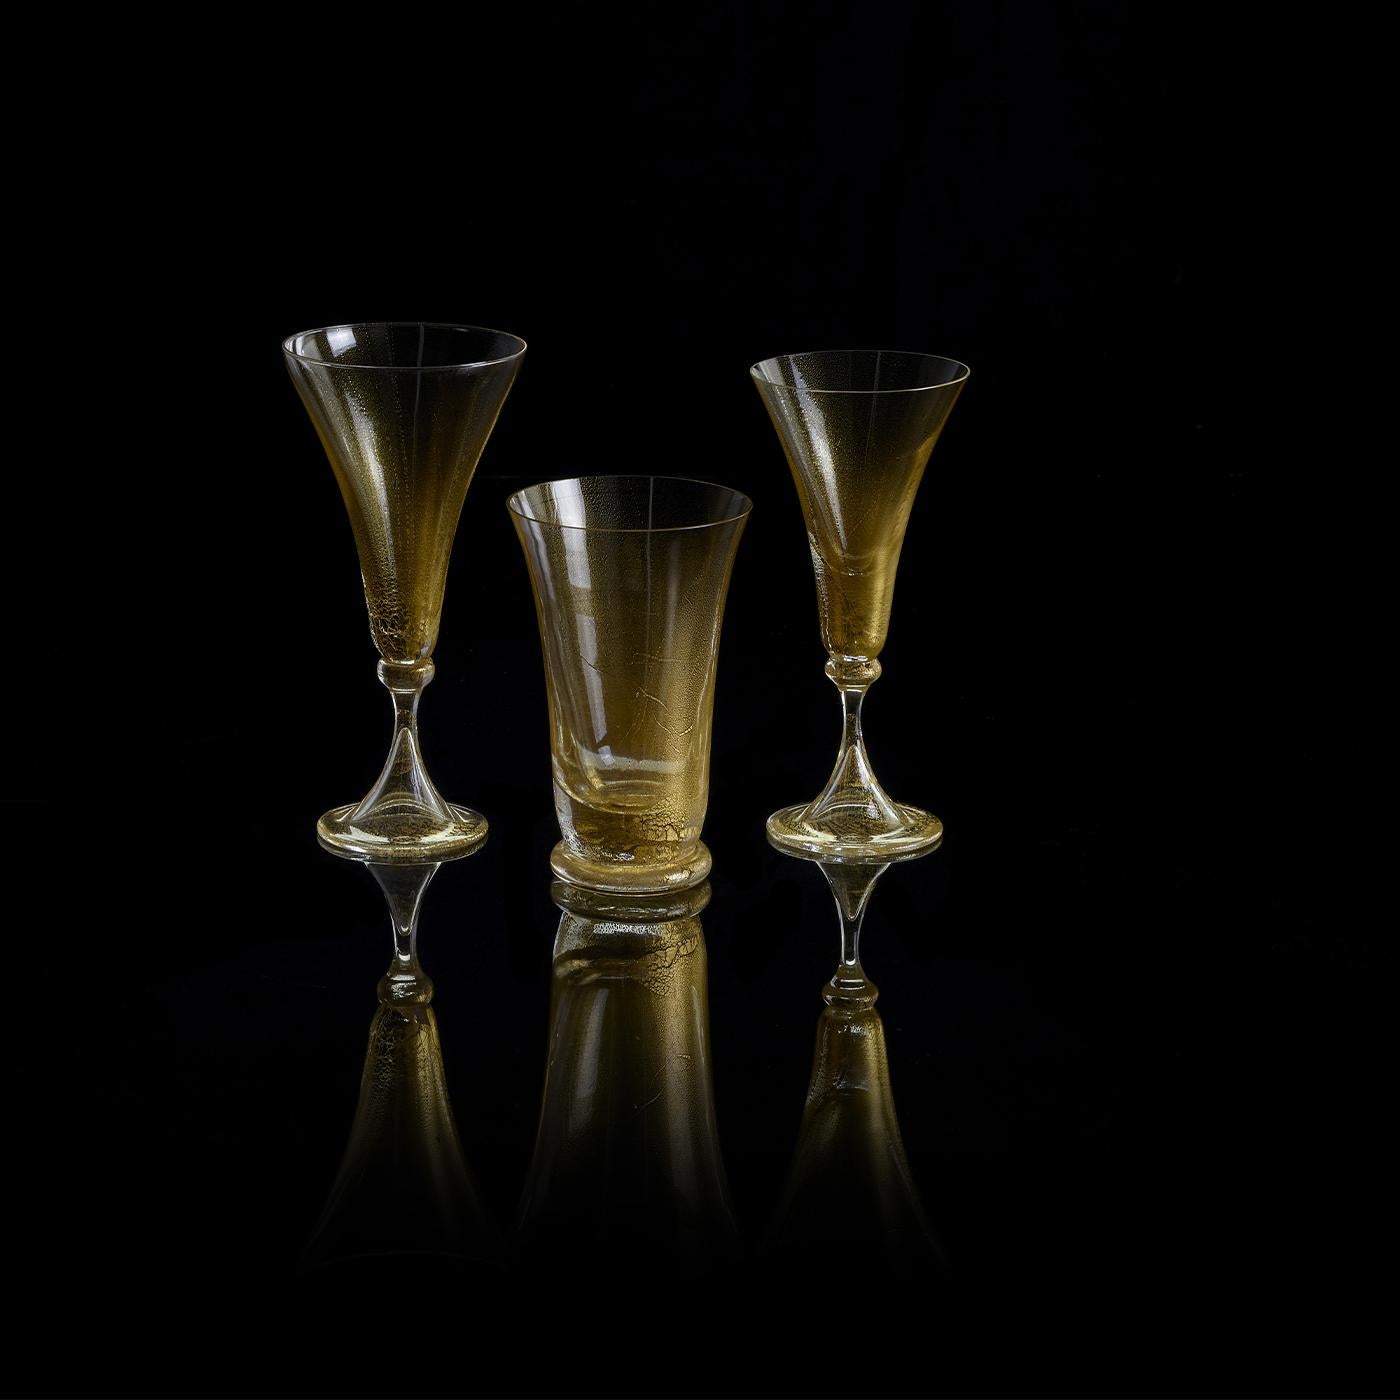 Bring a touch of timeless beauty to your table with these stunning bellflower-shaped goblets in Murano blown glass enriched by a 24-karat gold leaf pattern. The finely shaded central golden core gradually blends into an eggshell nuance and then